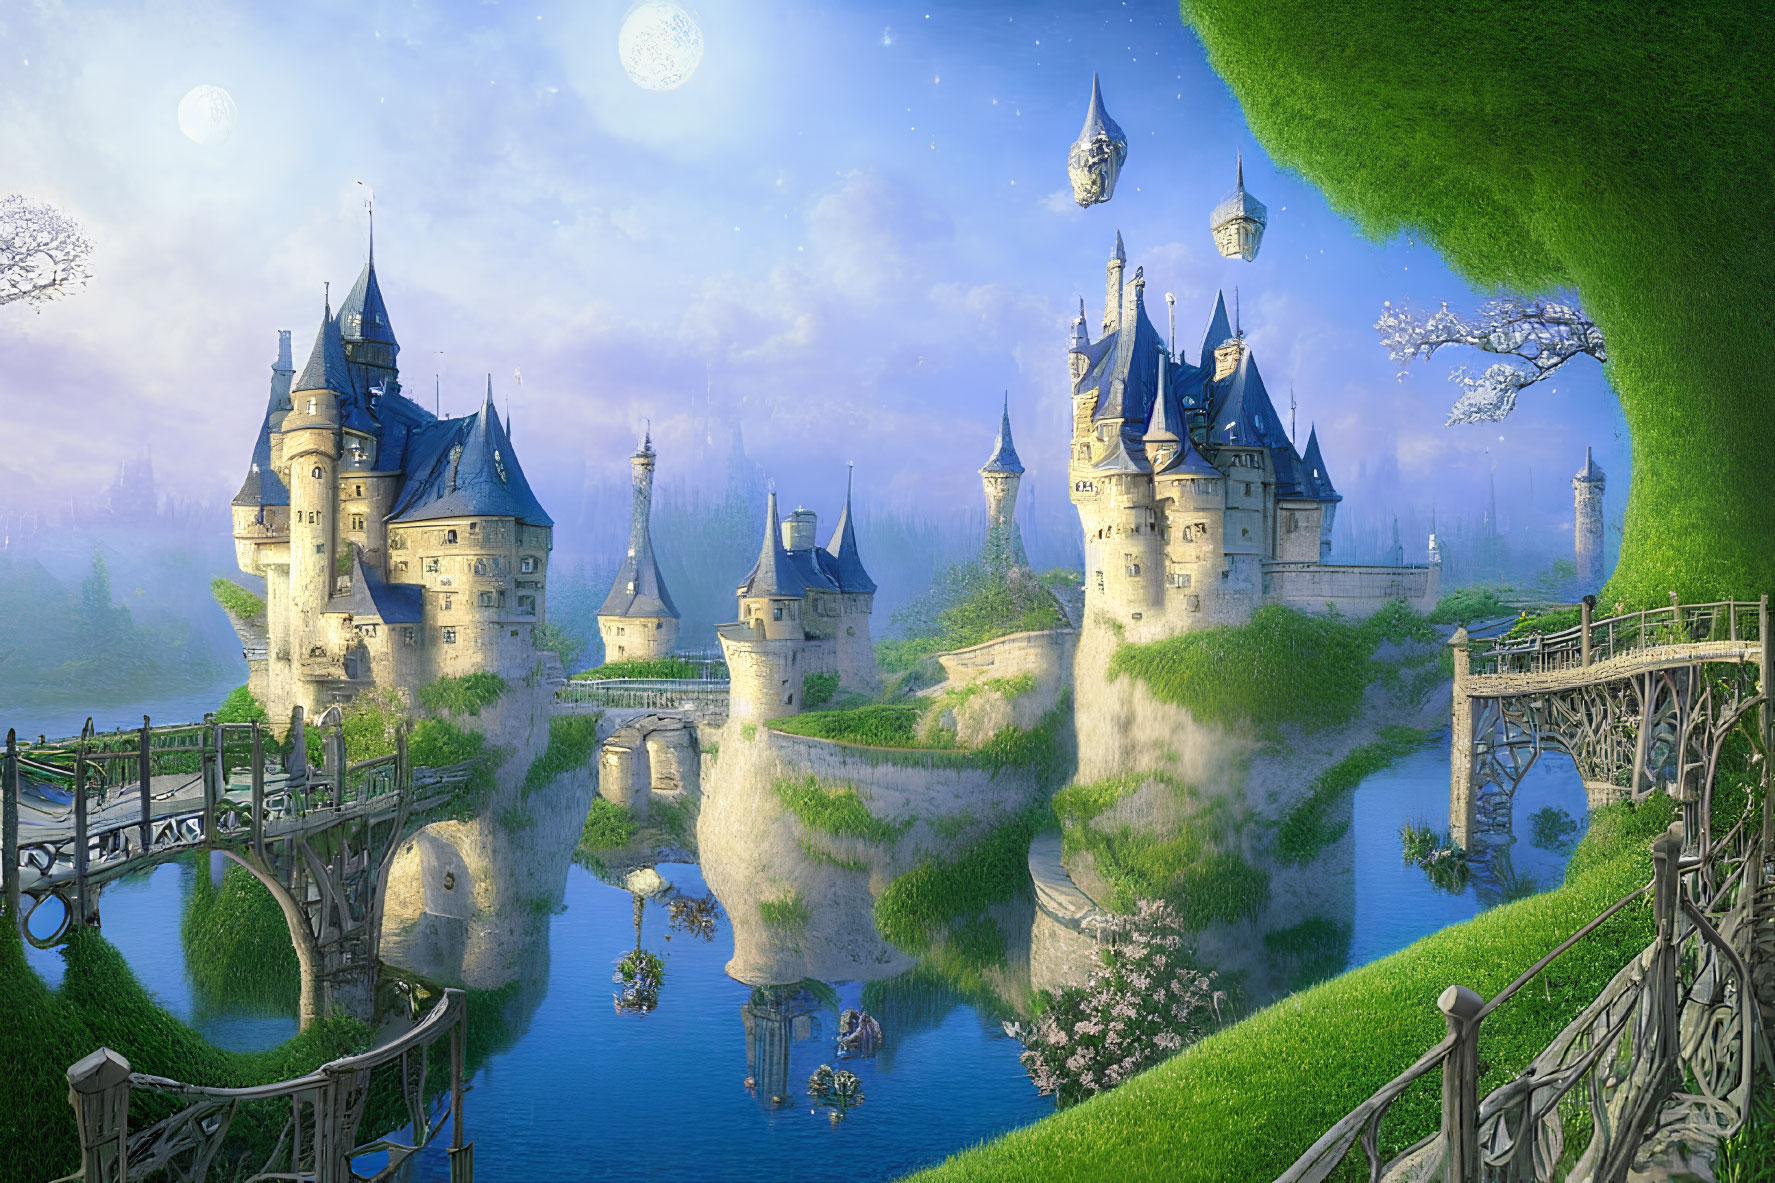 Majestic castle surrounded by water, bridges, lush greenery, and floating islands under a moon